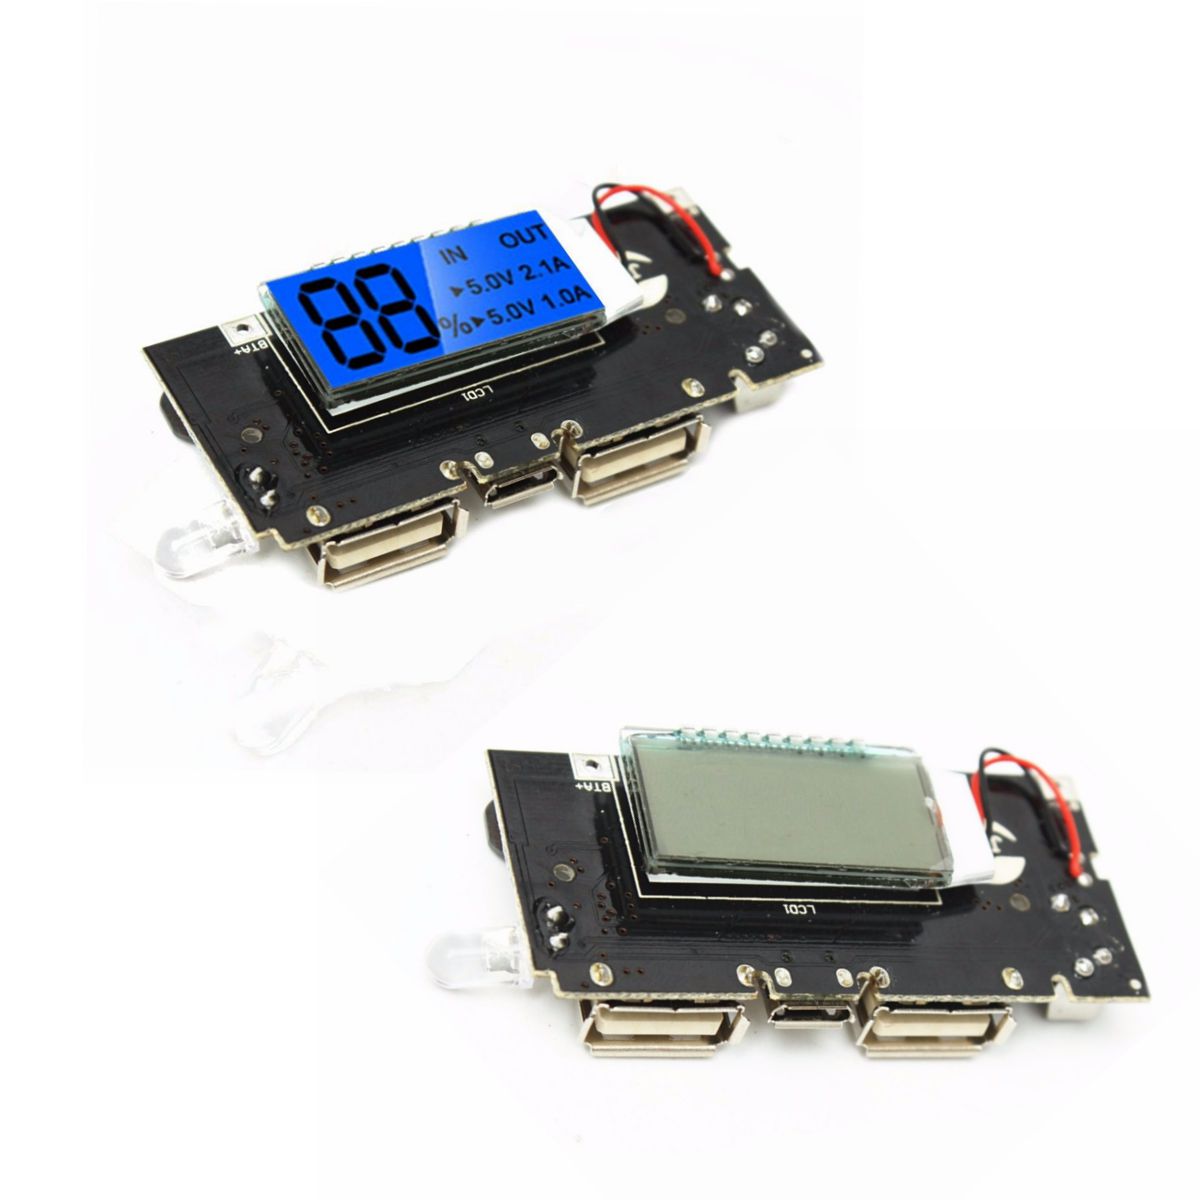 2Pcs-Dual-USB-5V-1A-21A-Mobile-Power-Bank-18650-Battery-Charger-PCB-Module-Board-1365765